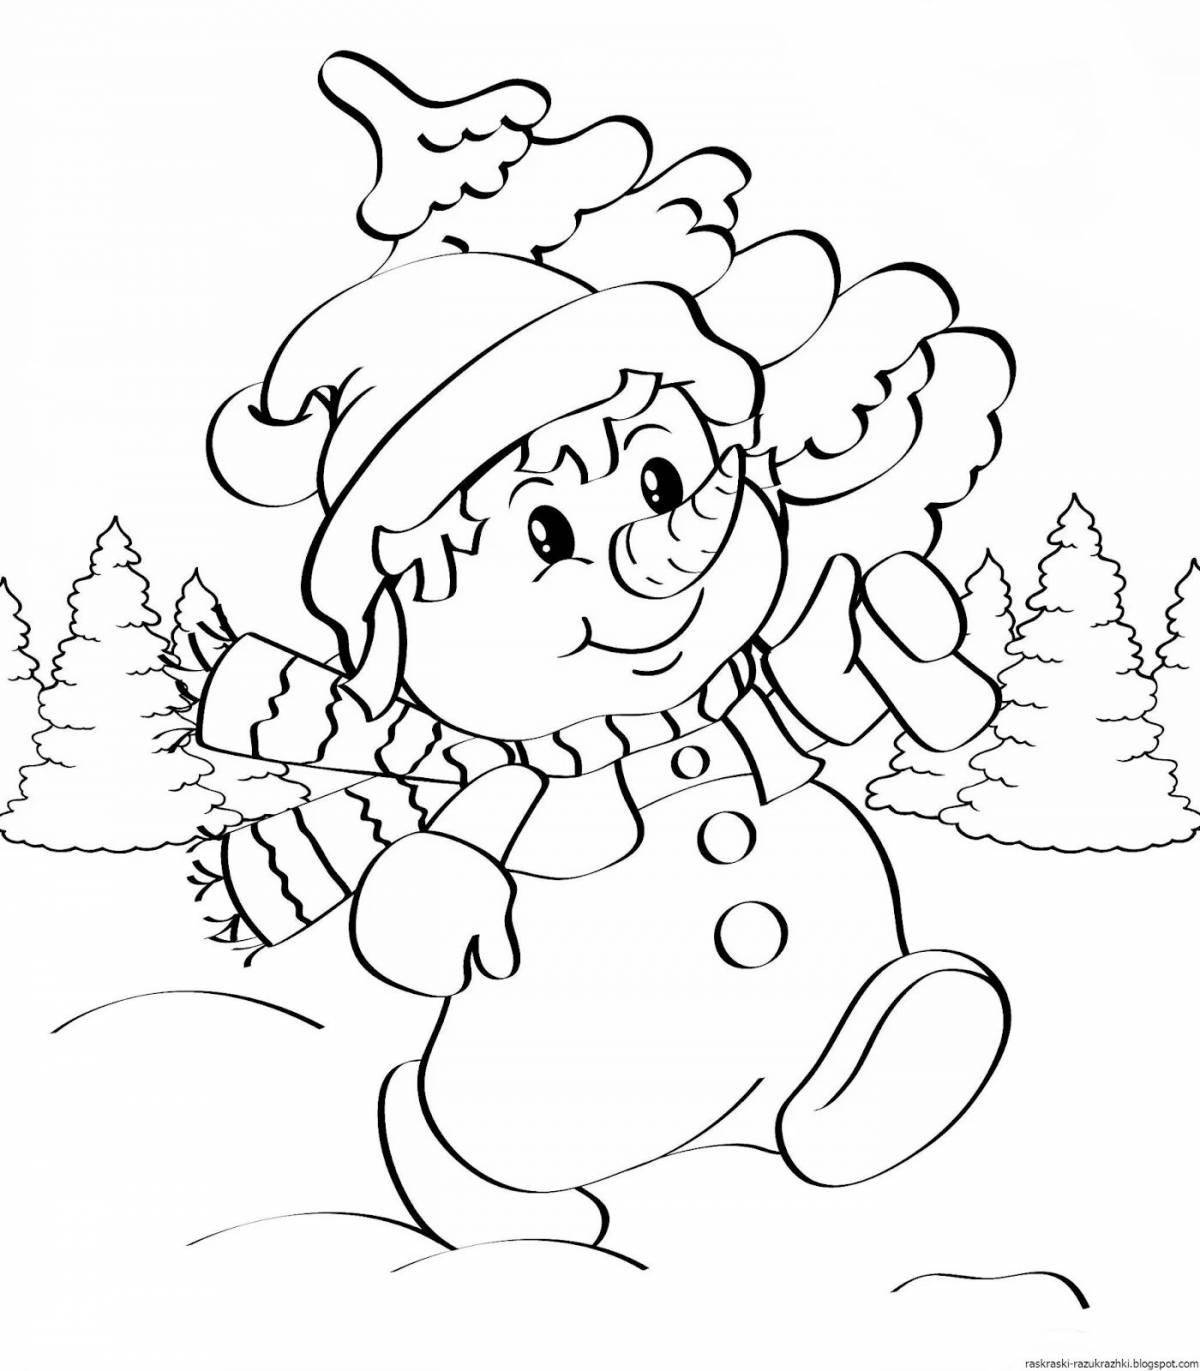 Colorful and illustrated Christmas coloring book for children